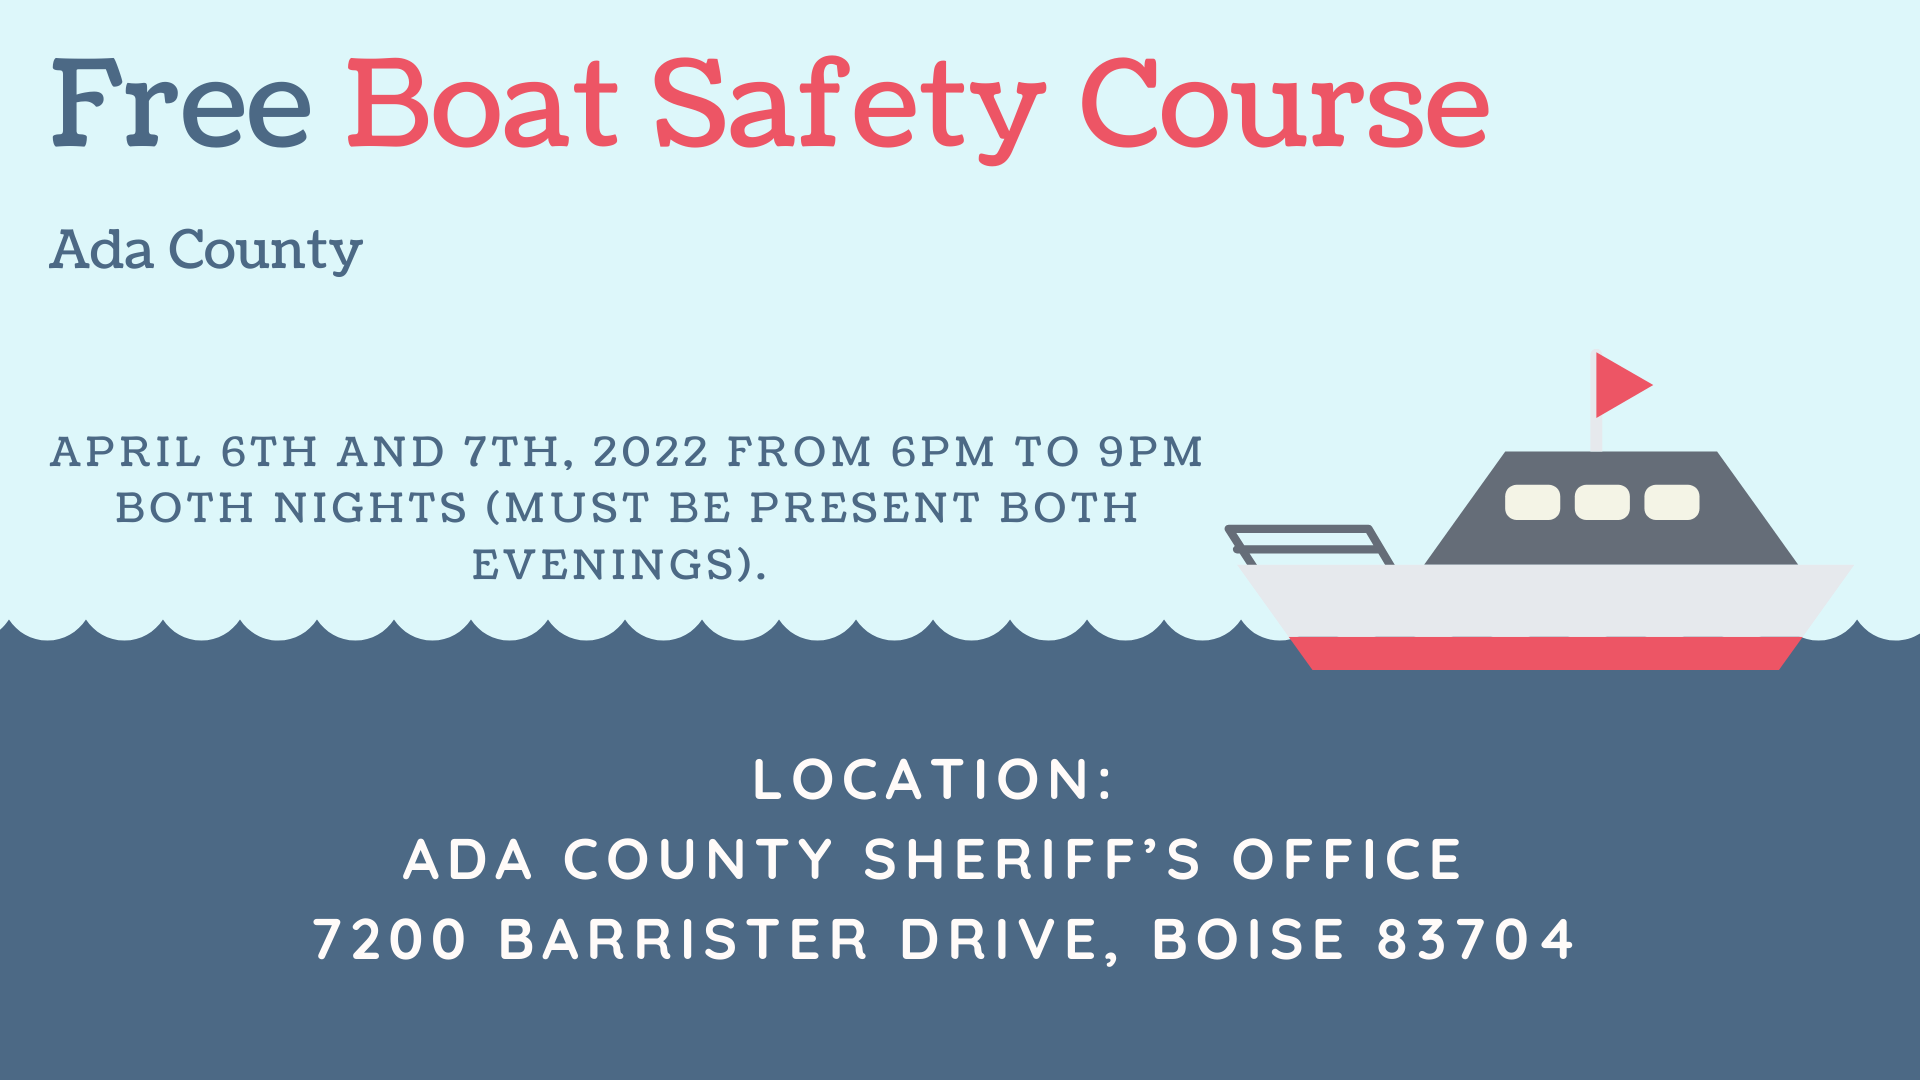 Ada County Sheriff's Office will be holding a FREE Boat Idaho Course April 6th and 7th, 2022 from 6pm to 9pm both nights (must be present both evenings). Located at 7200 Barrister Drive, Boise 83704. Email Detective Crystal Able at cable@adacounty.id.gov to sign up.